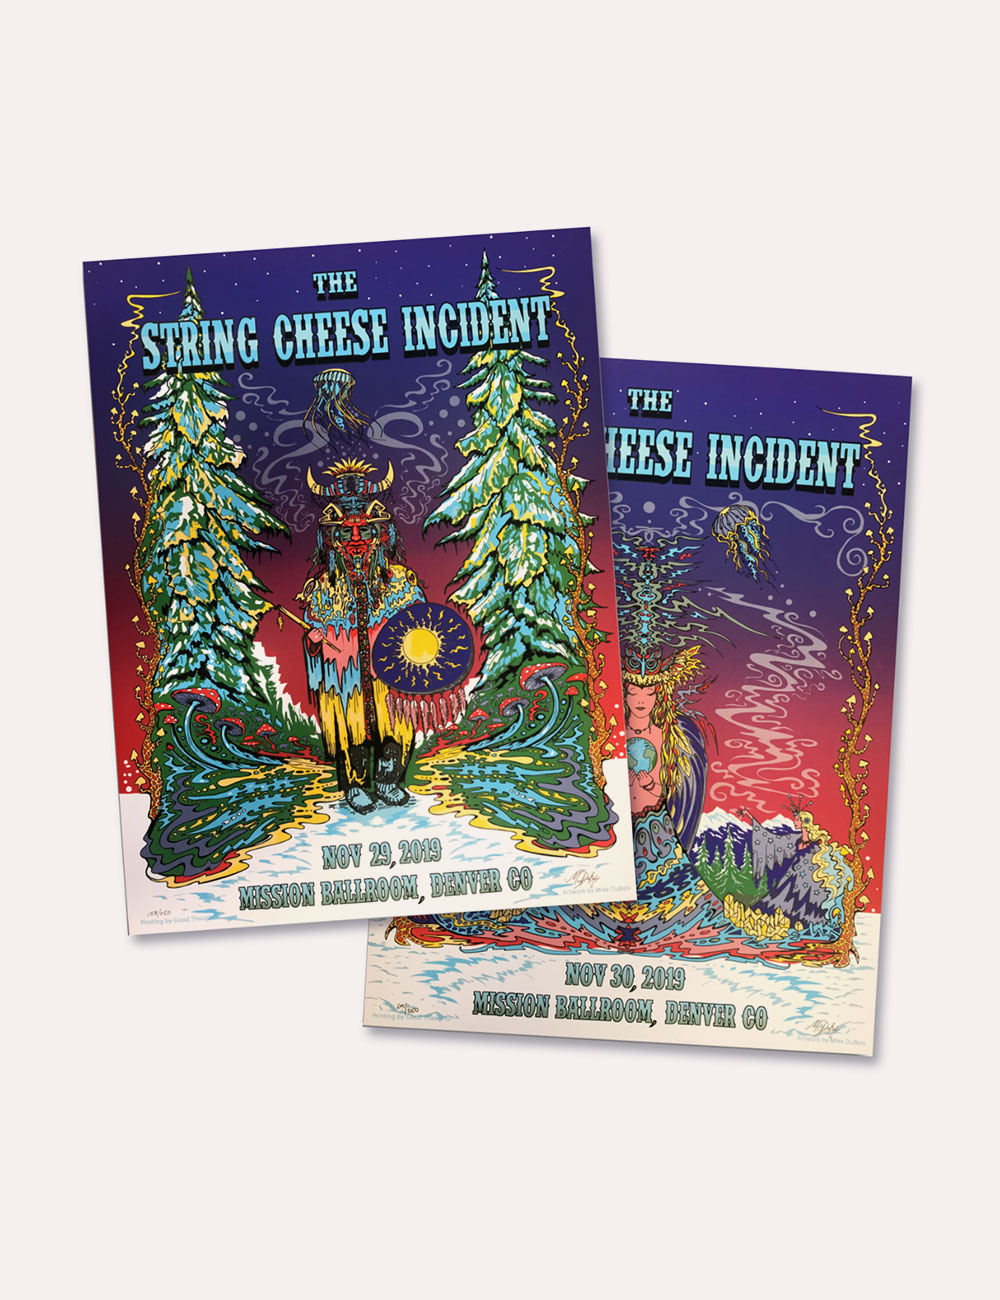 The String Cheese Incident - Merch - Poster - 2019 Mission Ballroom - Denver - Poster Set